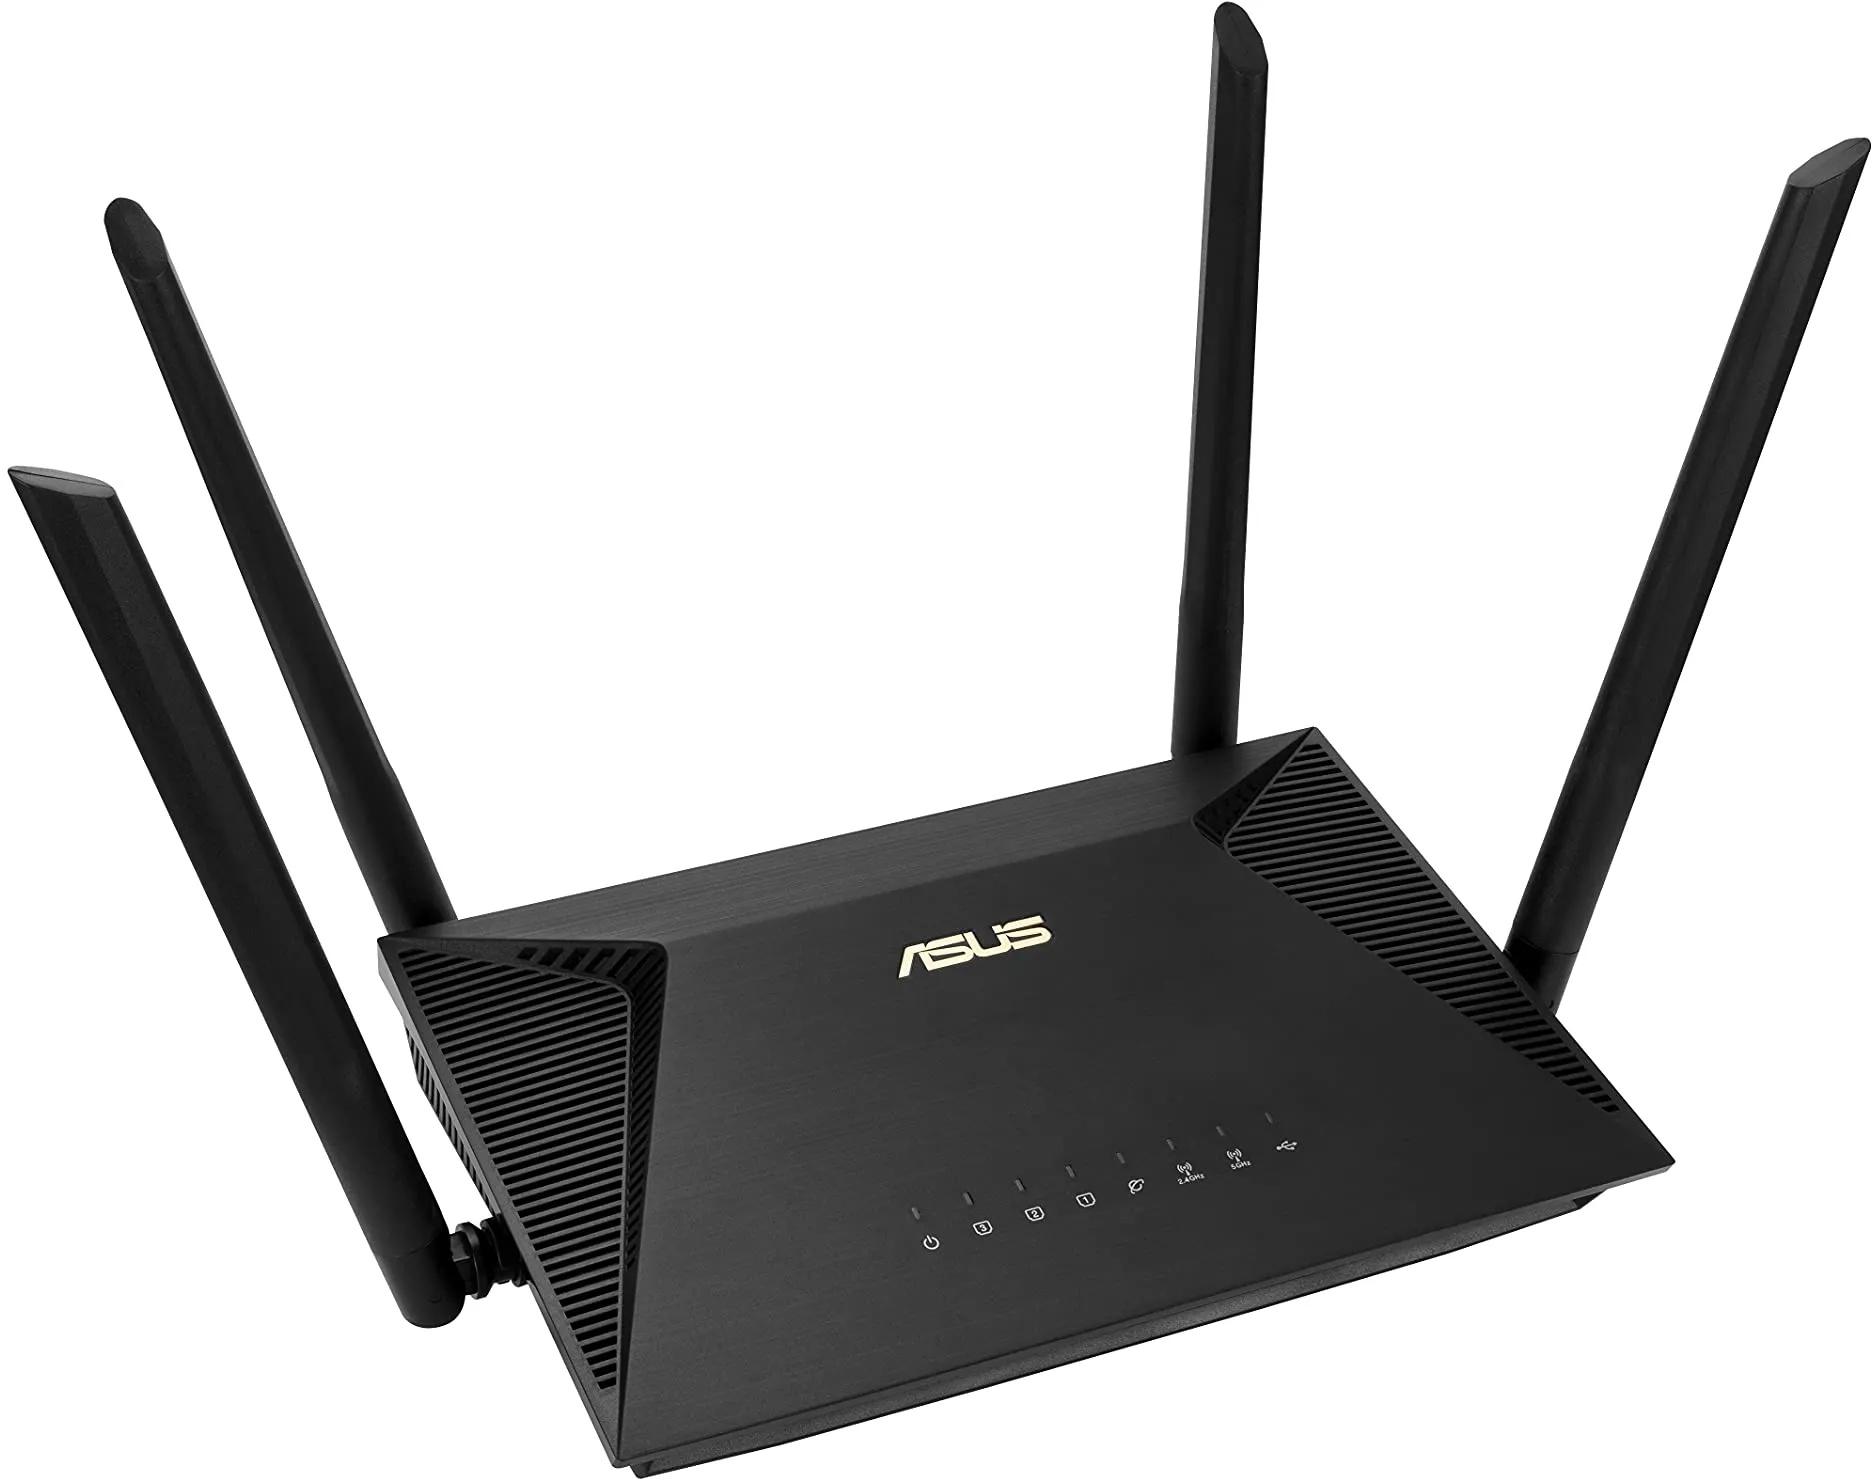 ASUS RT-AX1800U Expandable WiFi Router with Dual Band for Compatibility with Your Devices, Fast Connection via WiFi6, Built-in Internet Protection with Unlimited Updates, Black